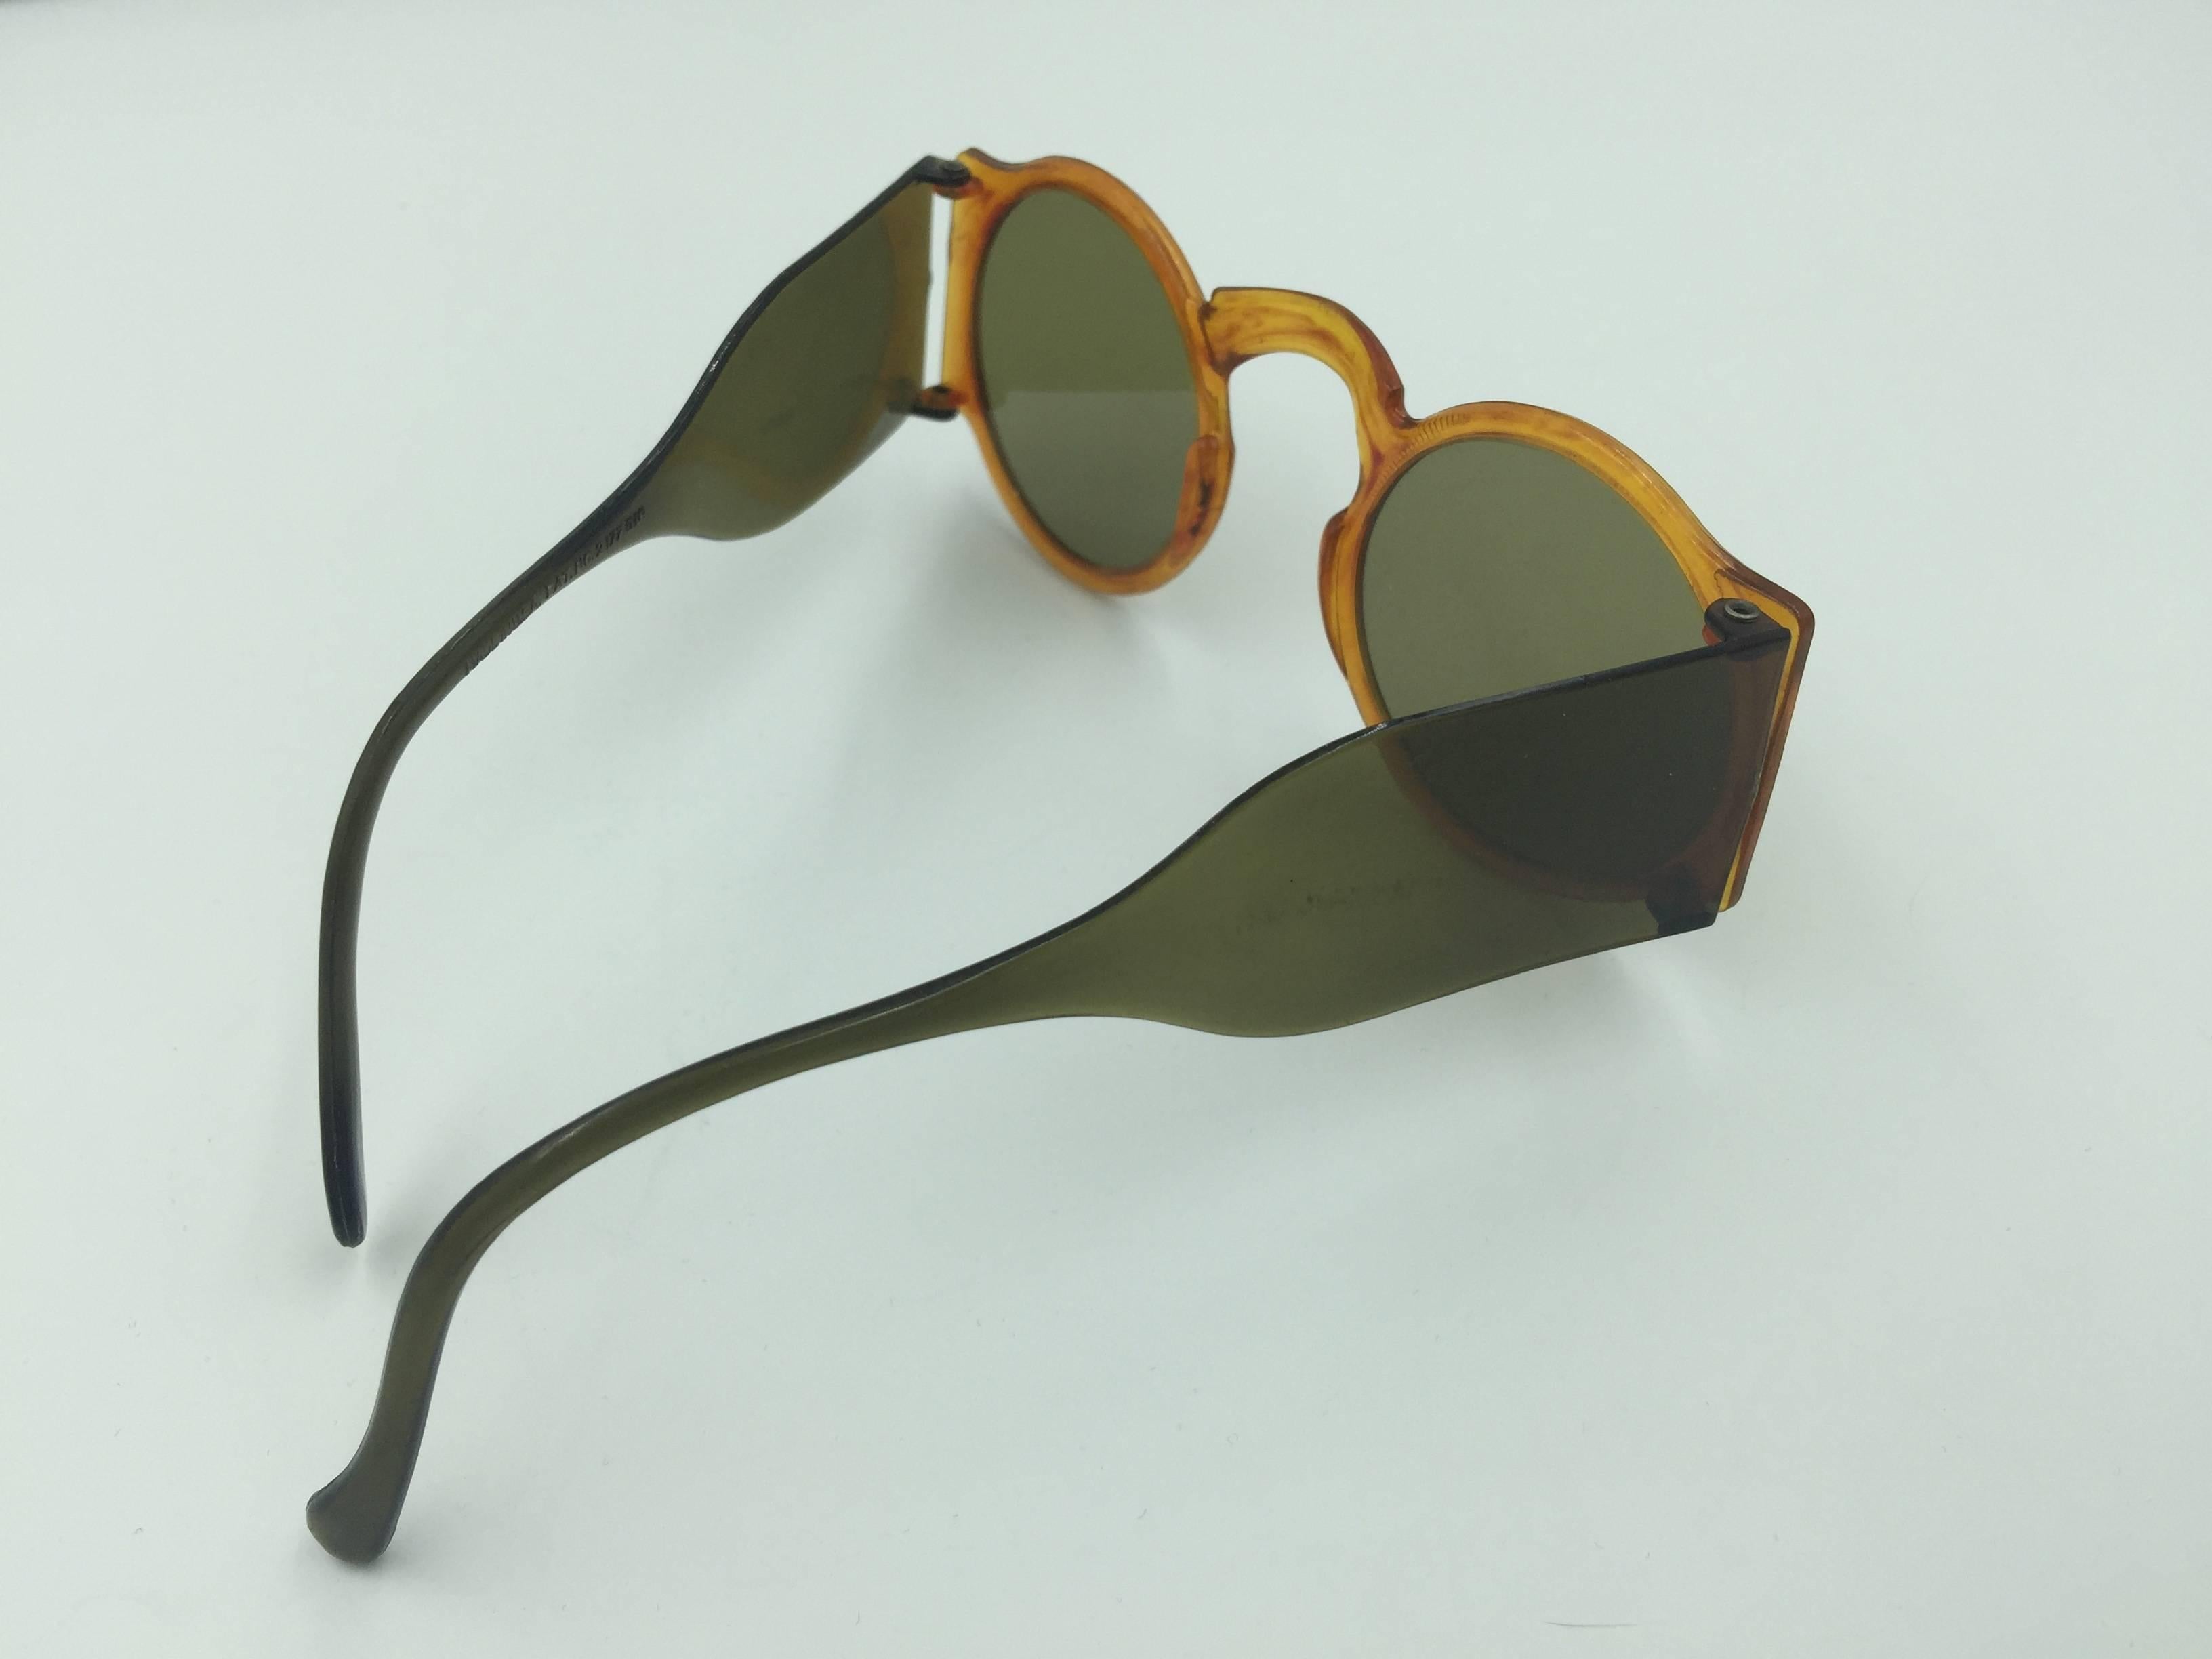 

1930's Faux Tortoise Sunglasses with side shields.

Amazingly unique!

Original 1930's sunglasses in good condition appear only very rarely 
on the vintage market today.

The lenses and side shields are a gray/green tone depending on the